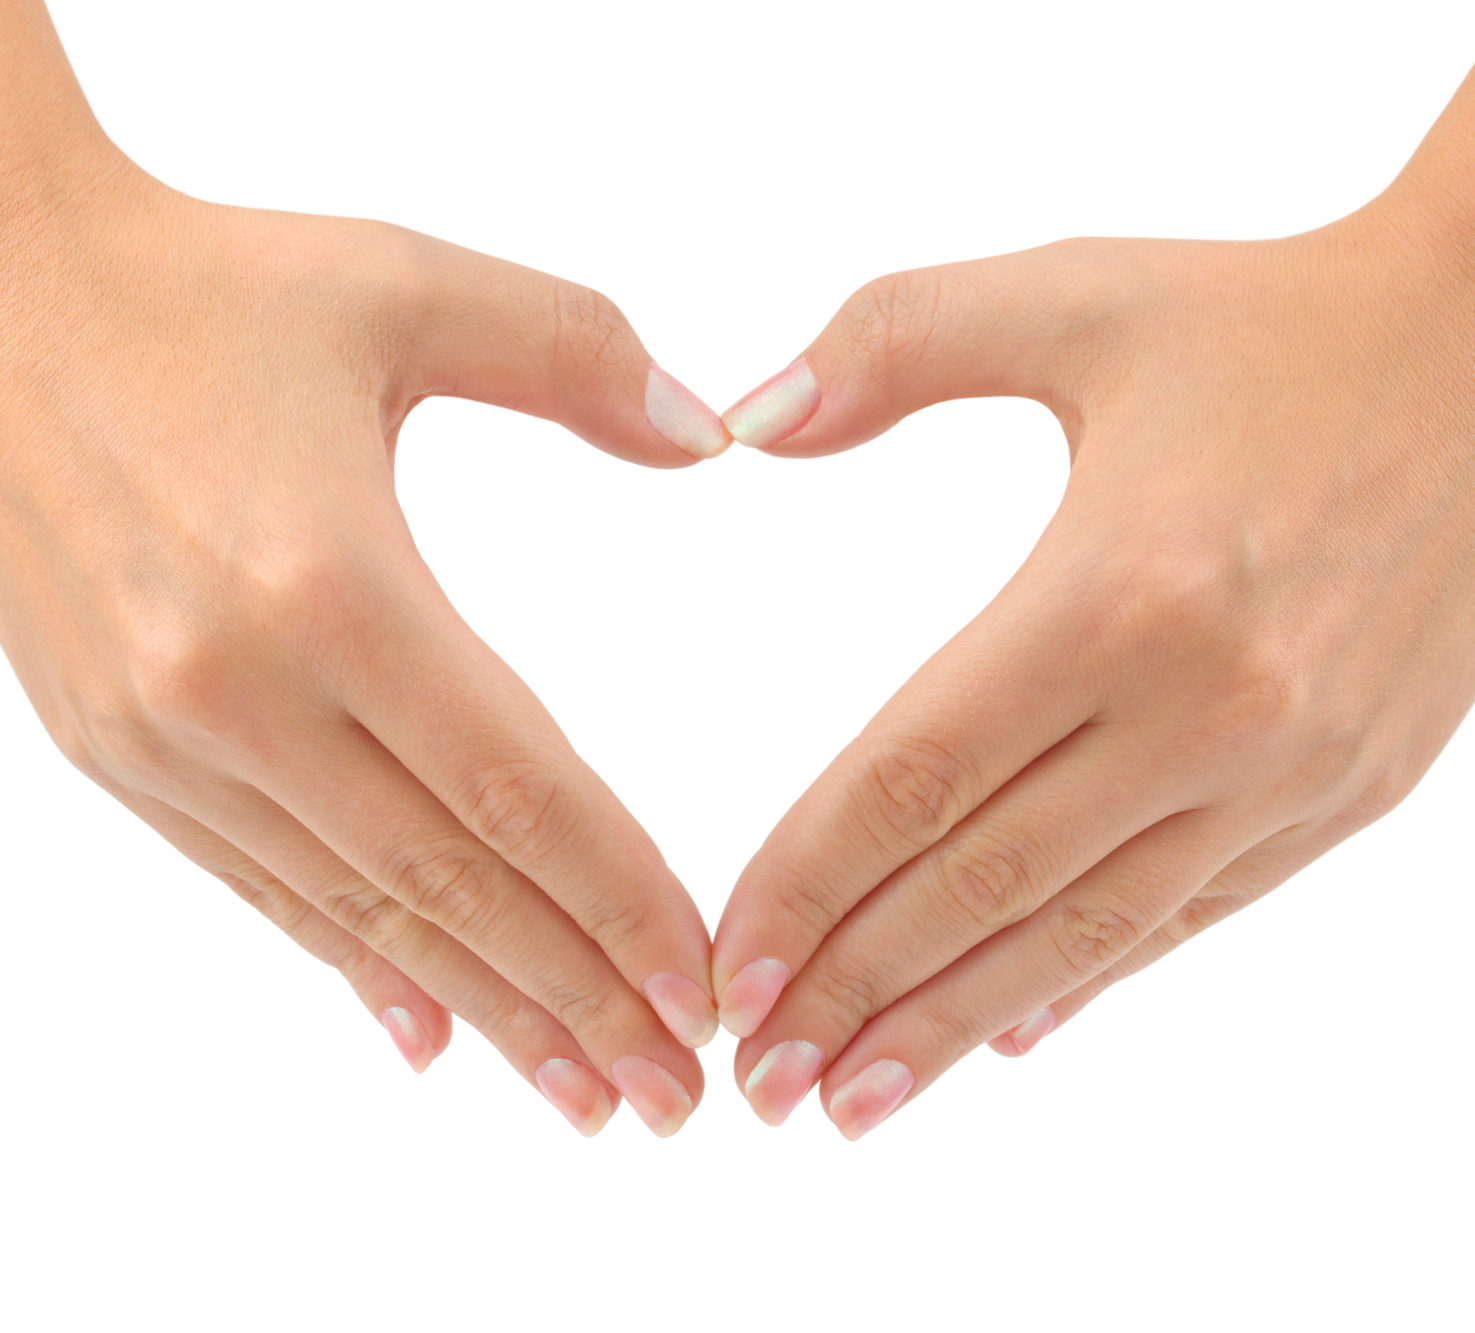 Heart made of hands isolated on white background